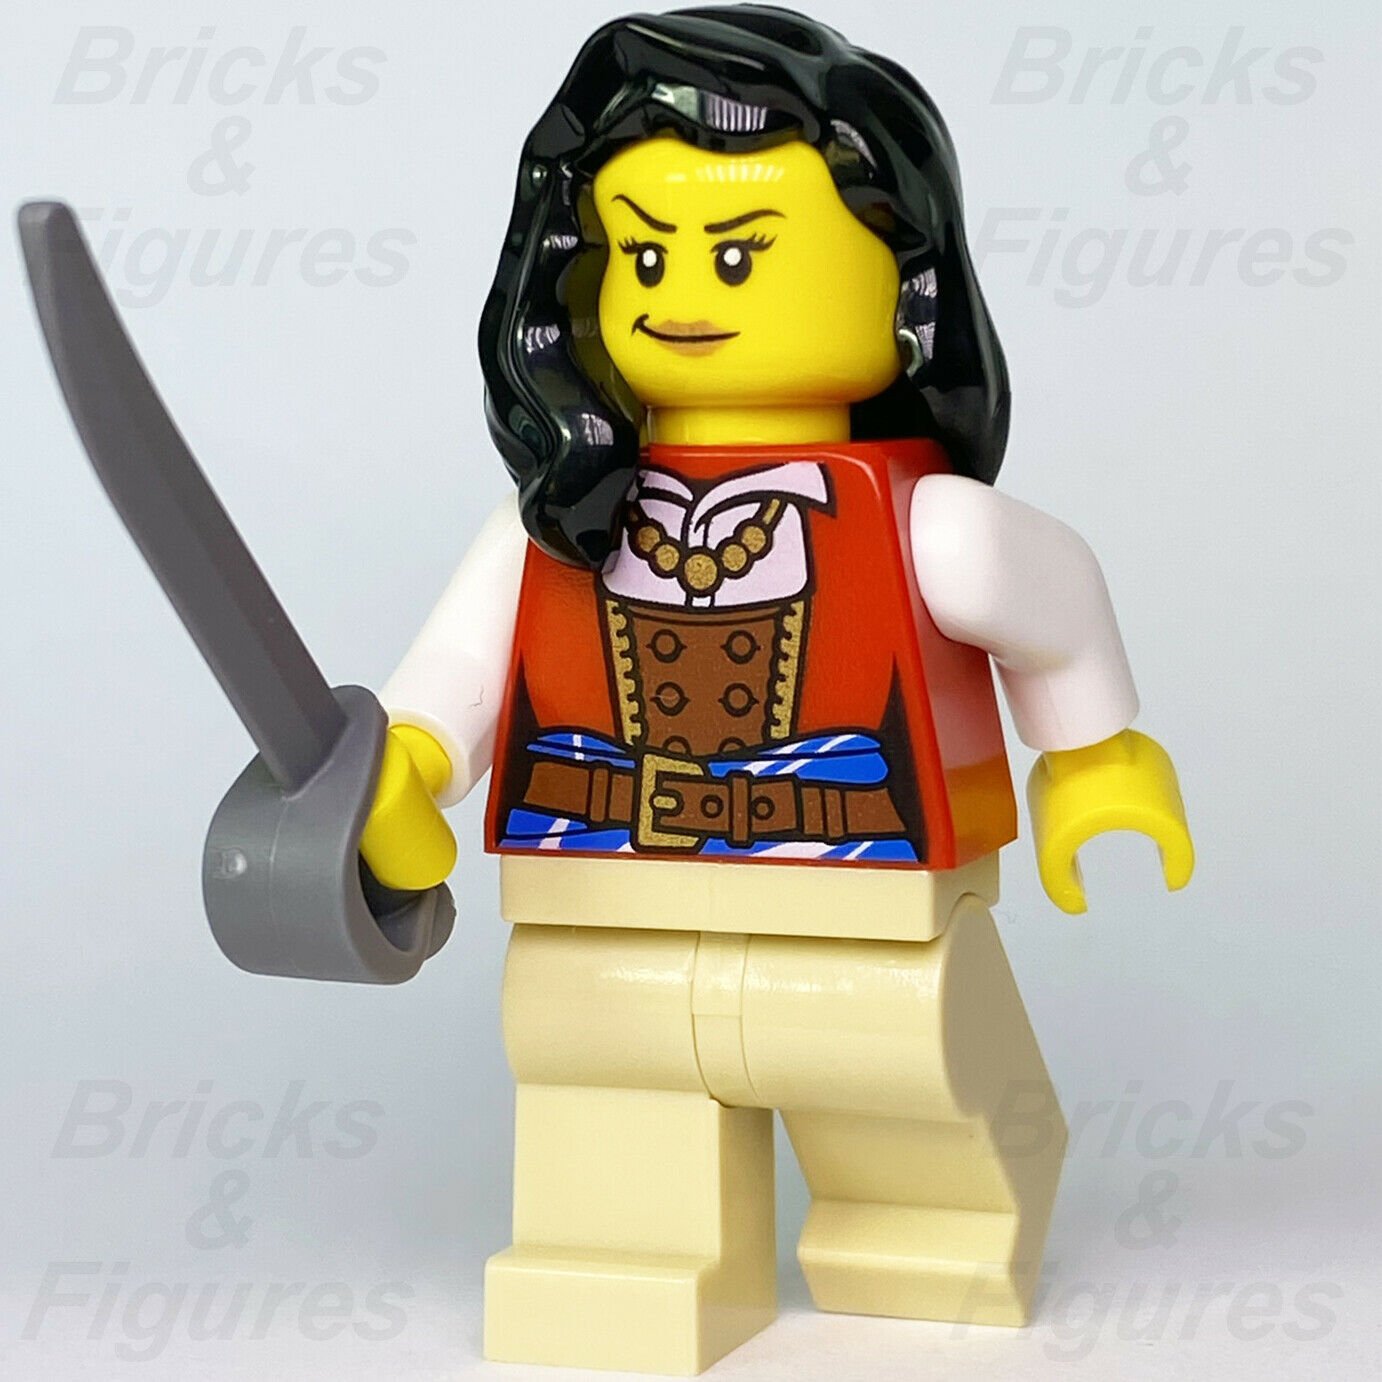 New Ideas LEGO Lady Anchor Pirates Minifigure with Sword from set 21322 idea067 - Bricks & Figures